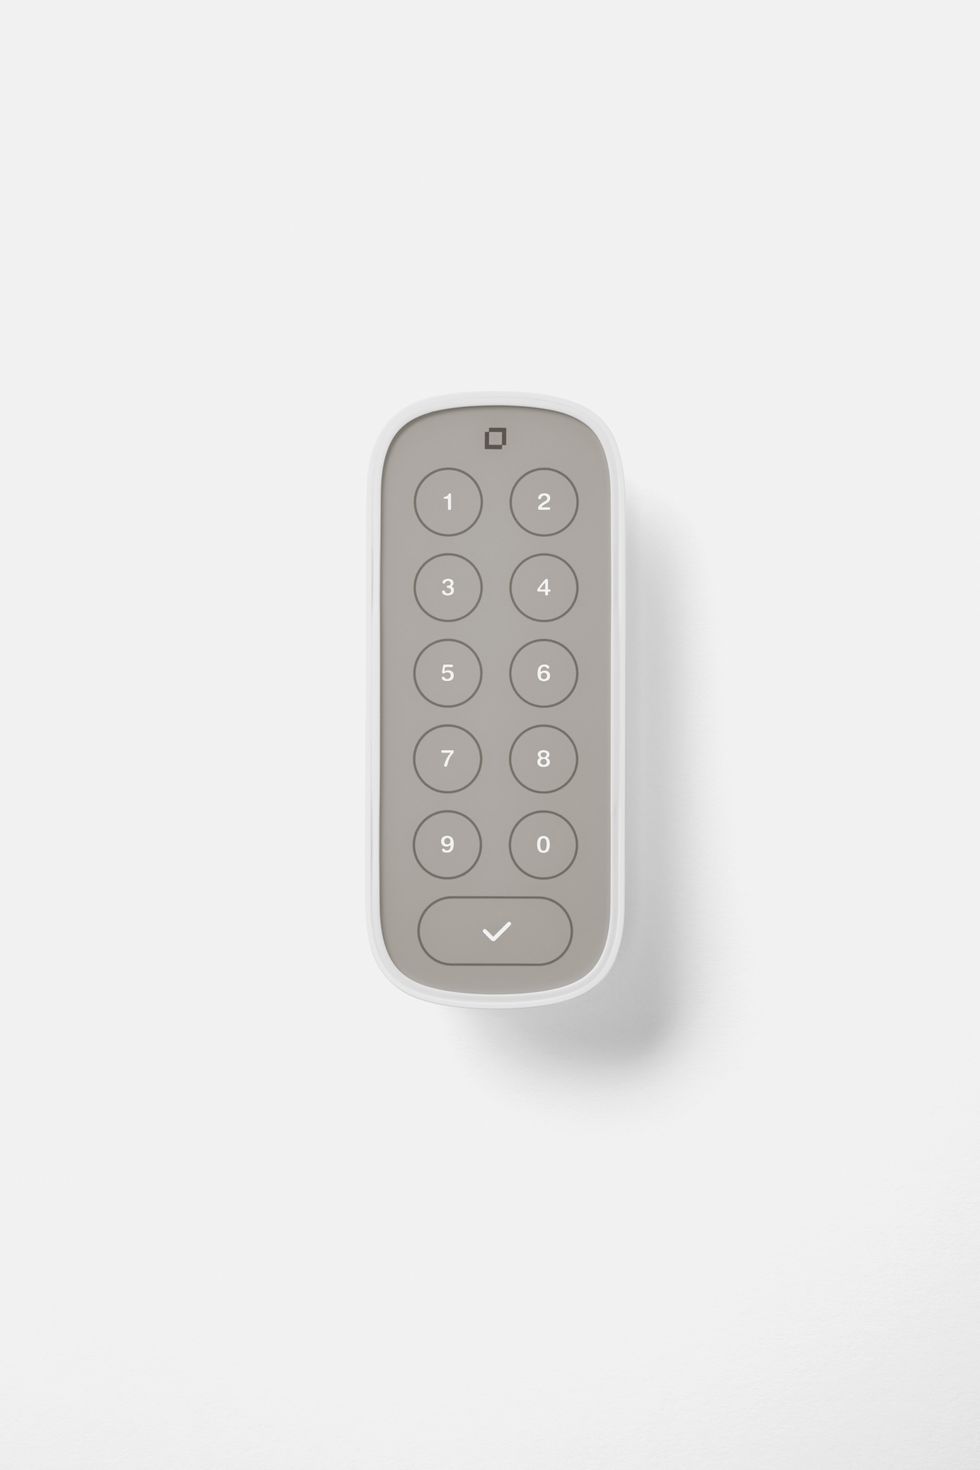 Product shot of Level Keypad on a wall.